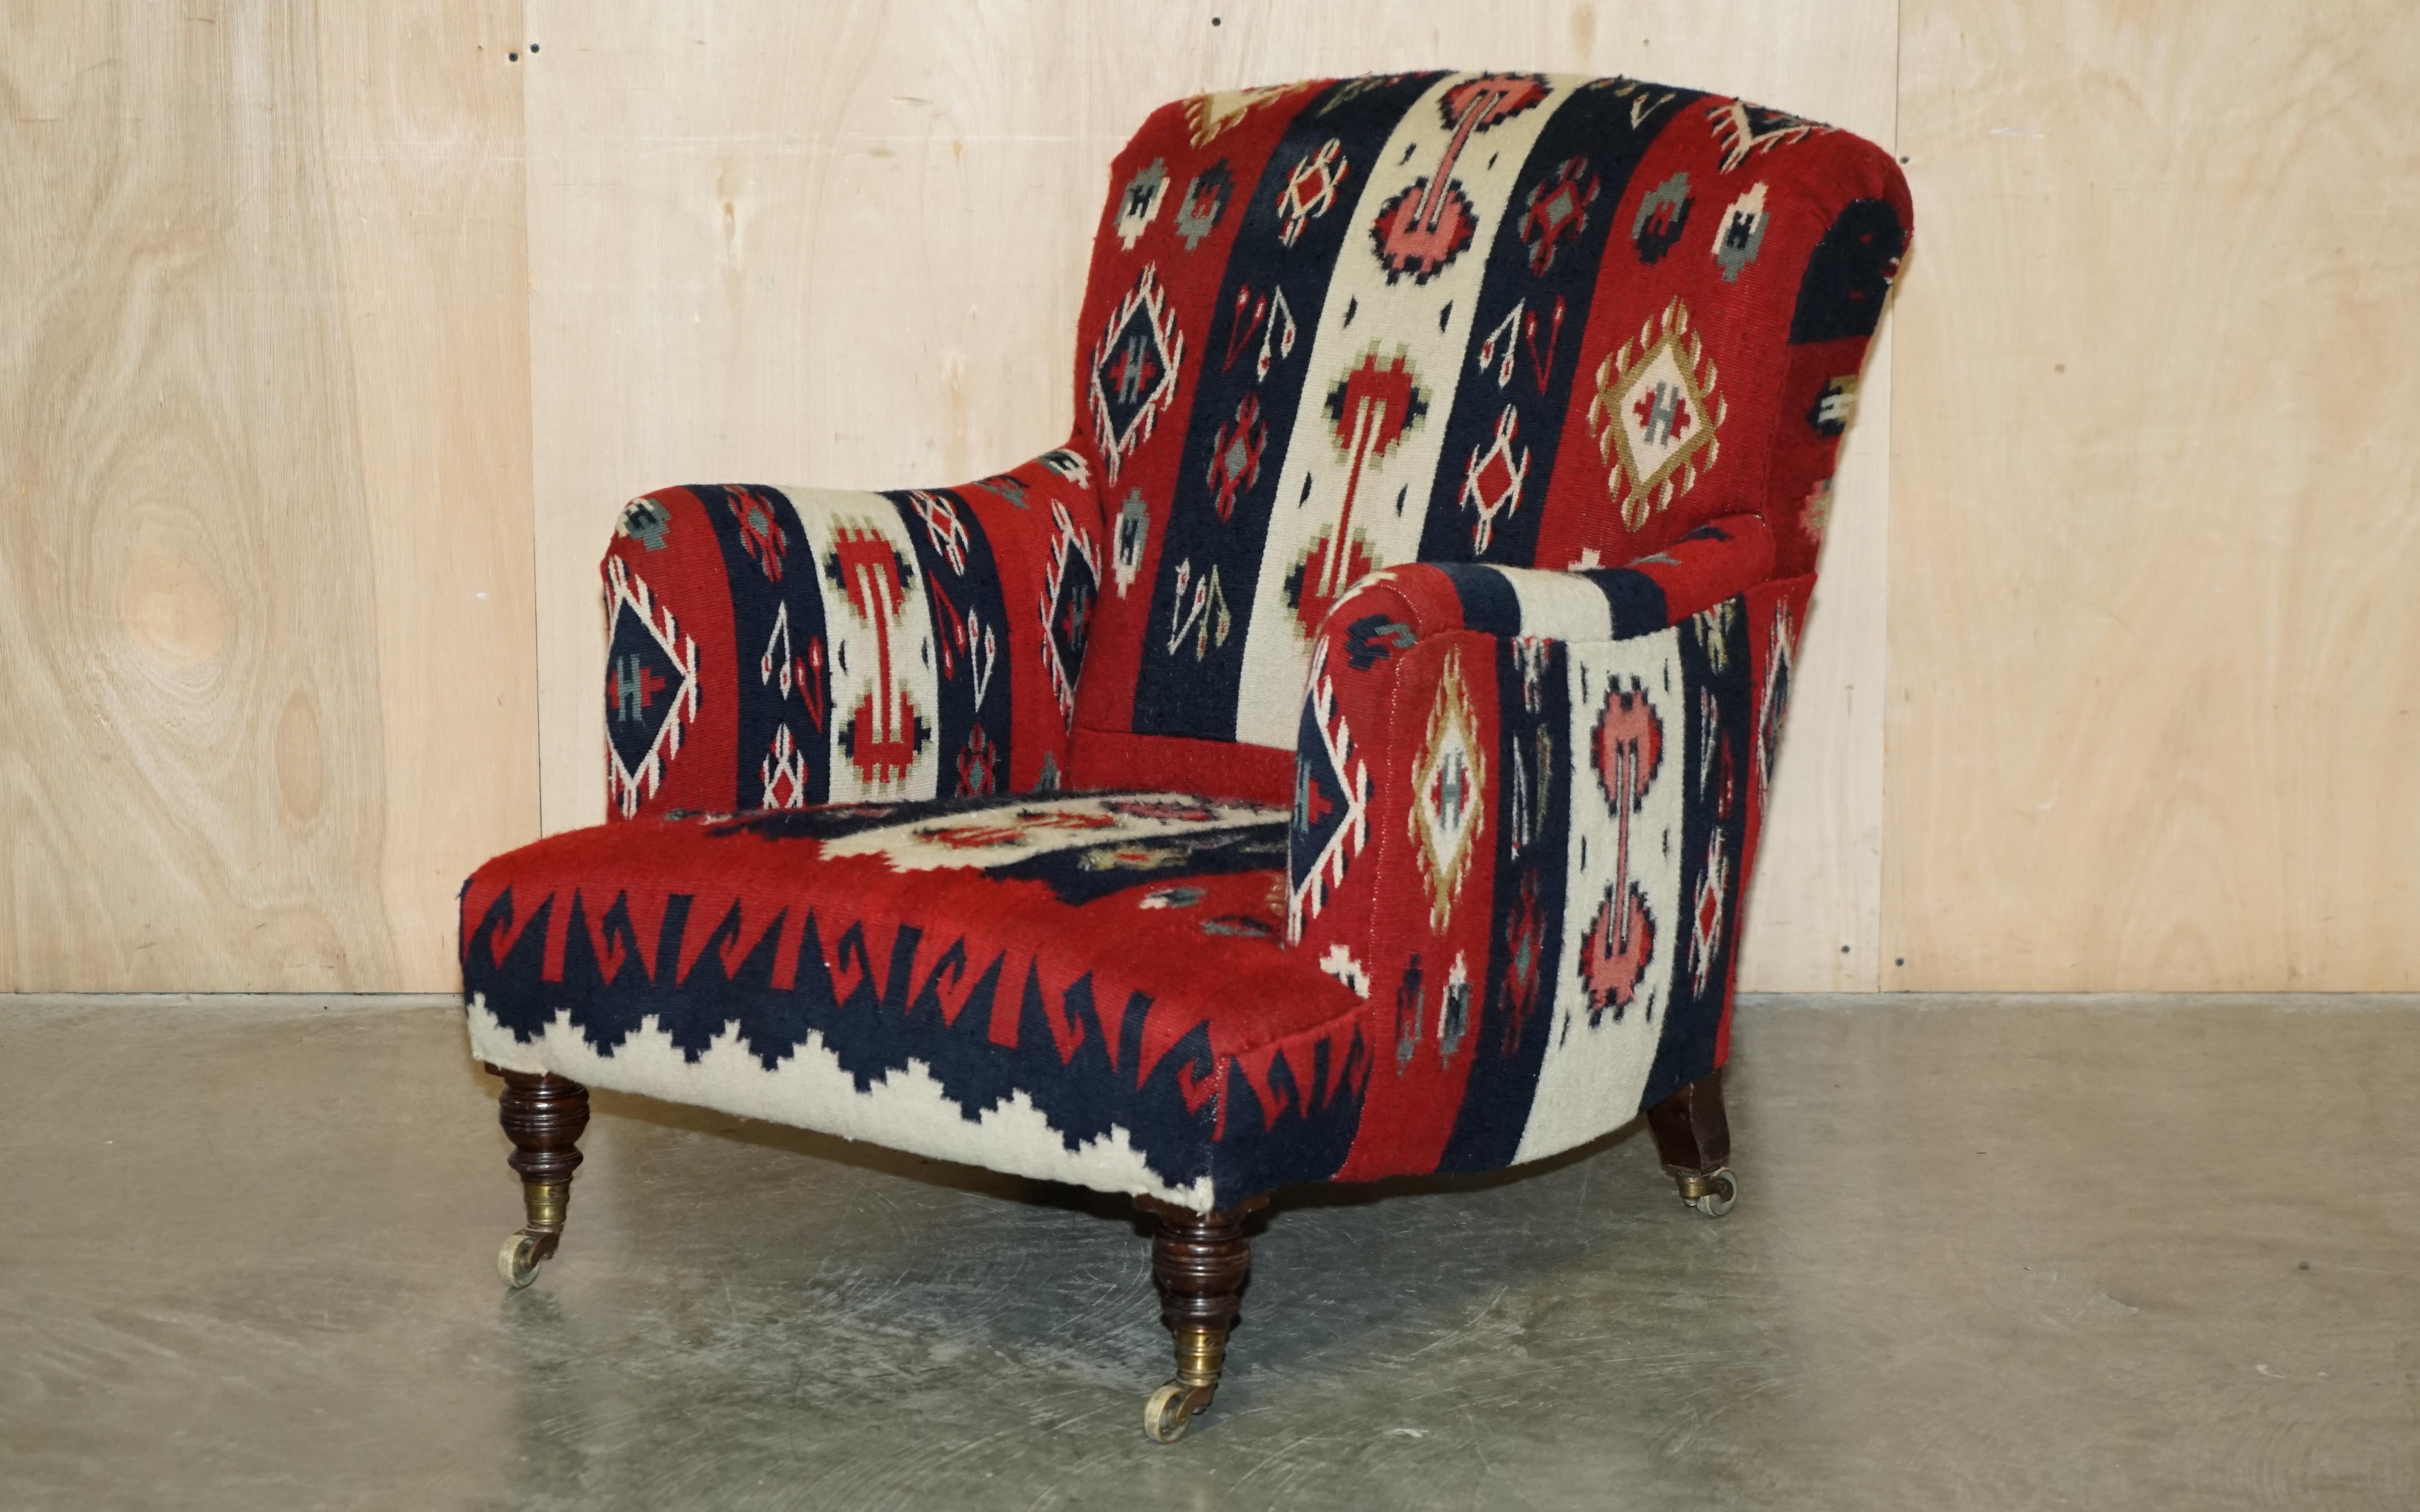 Royal House Antiques

Royal House Antiques is delighted to offer for sale this super rare, totally original, Howard & Son's Berners street fully stamped Bridgewater model armchair with the super rare, English Country House Kilim upholstery 

Please